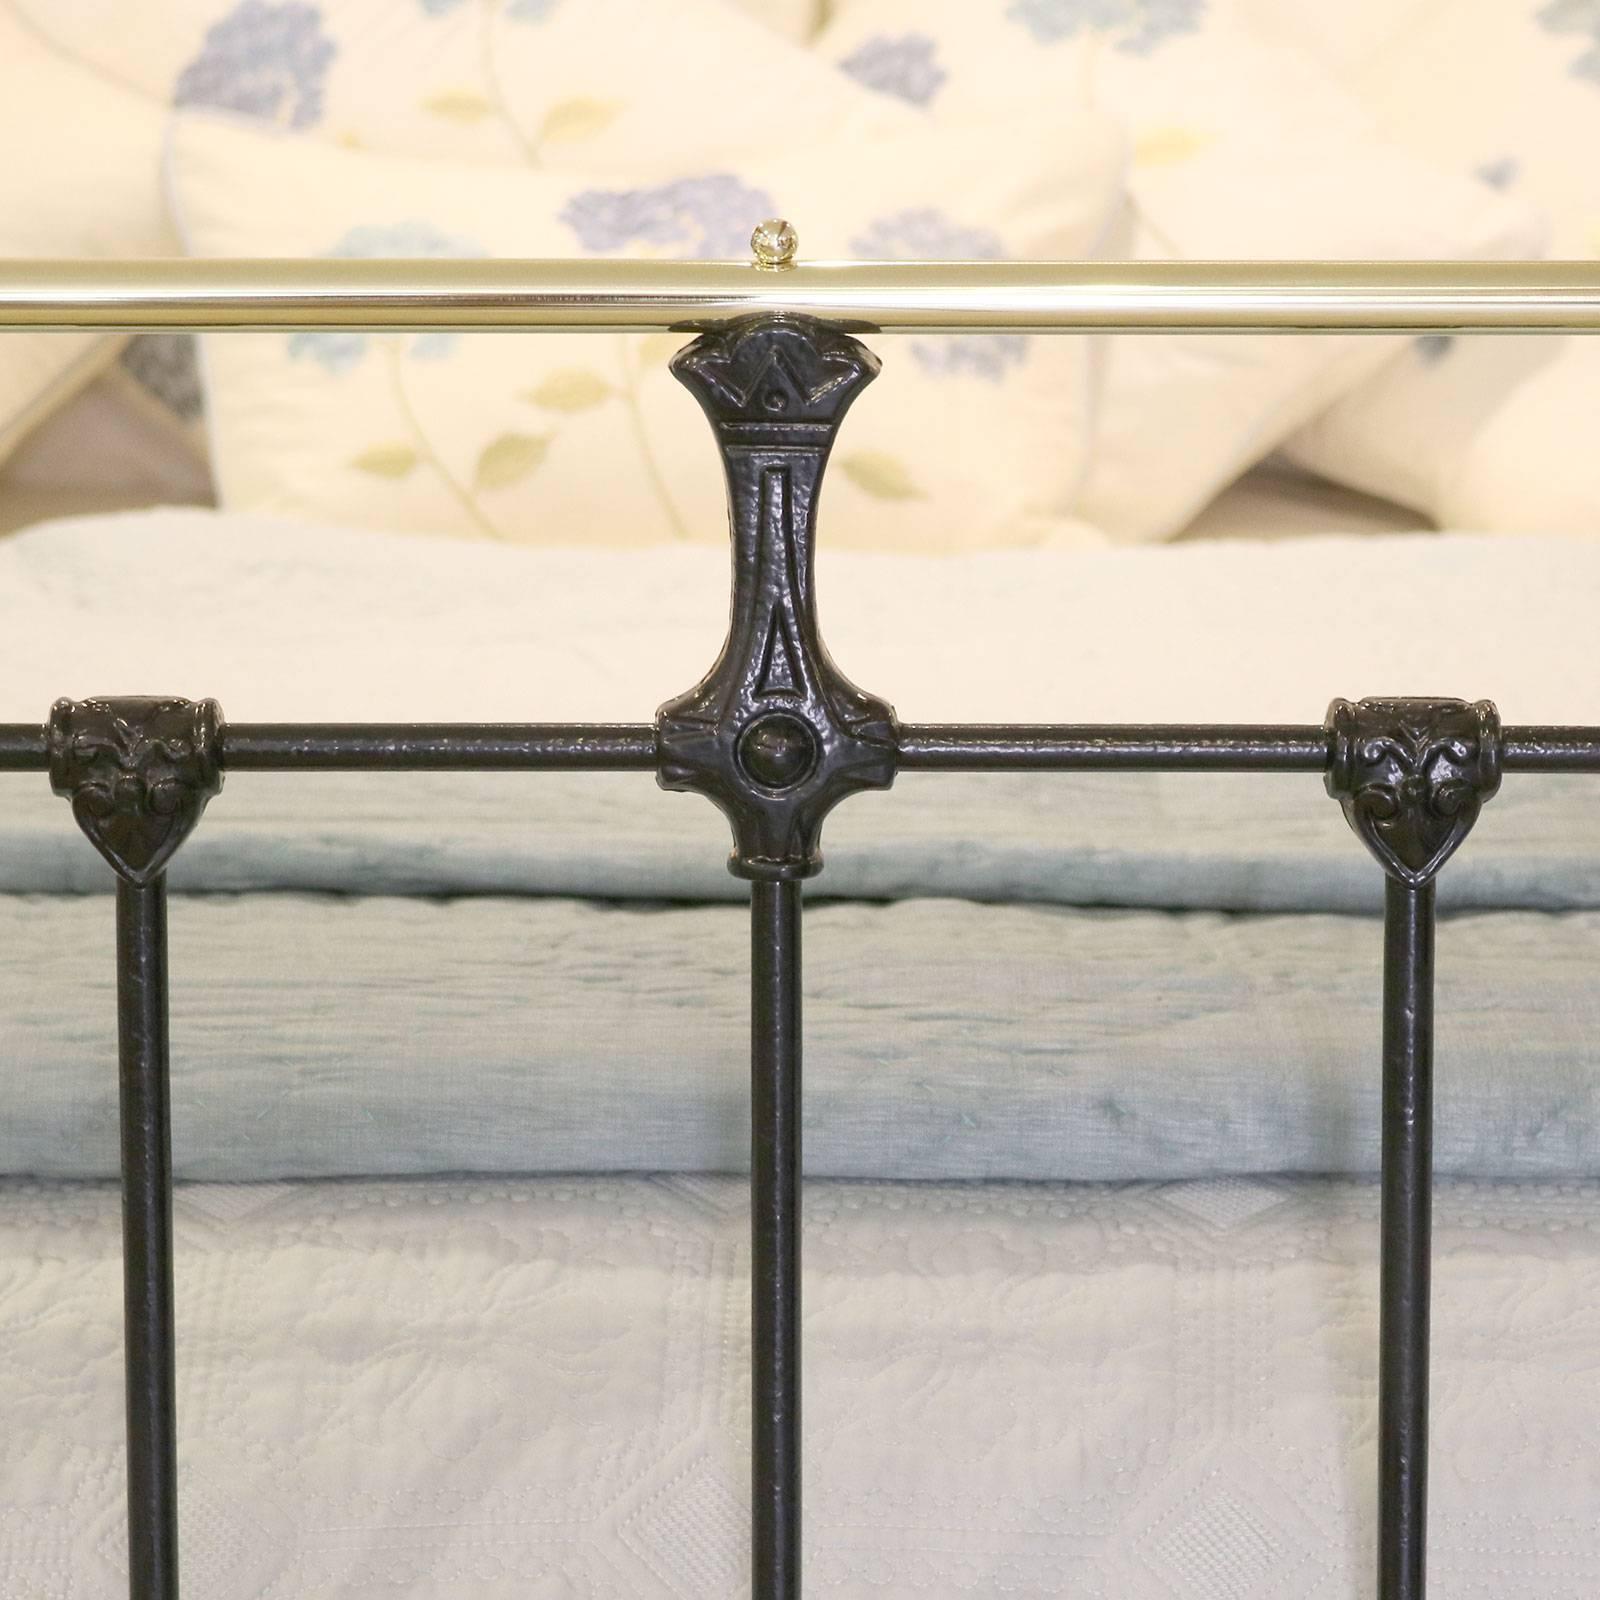 Cast Brass and Iron Bed in Black, MK113